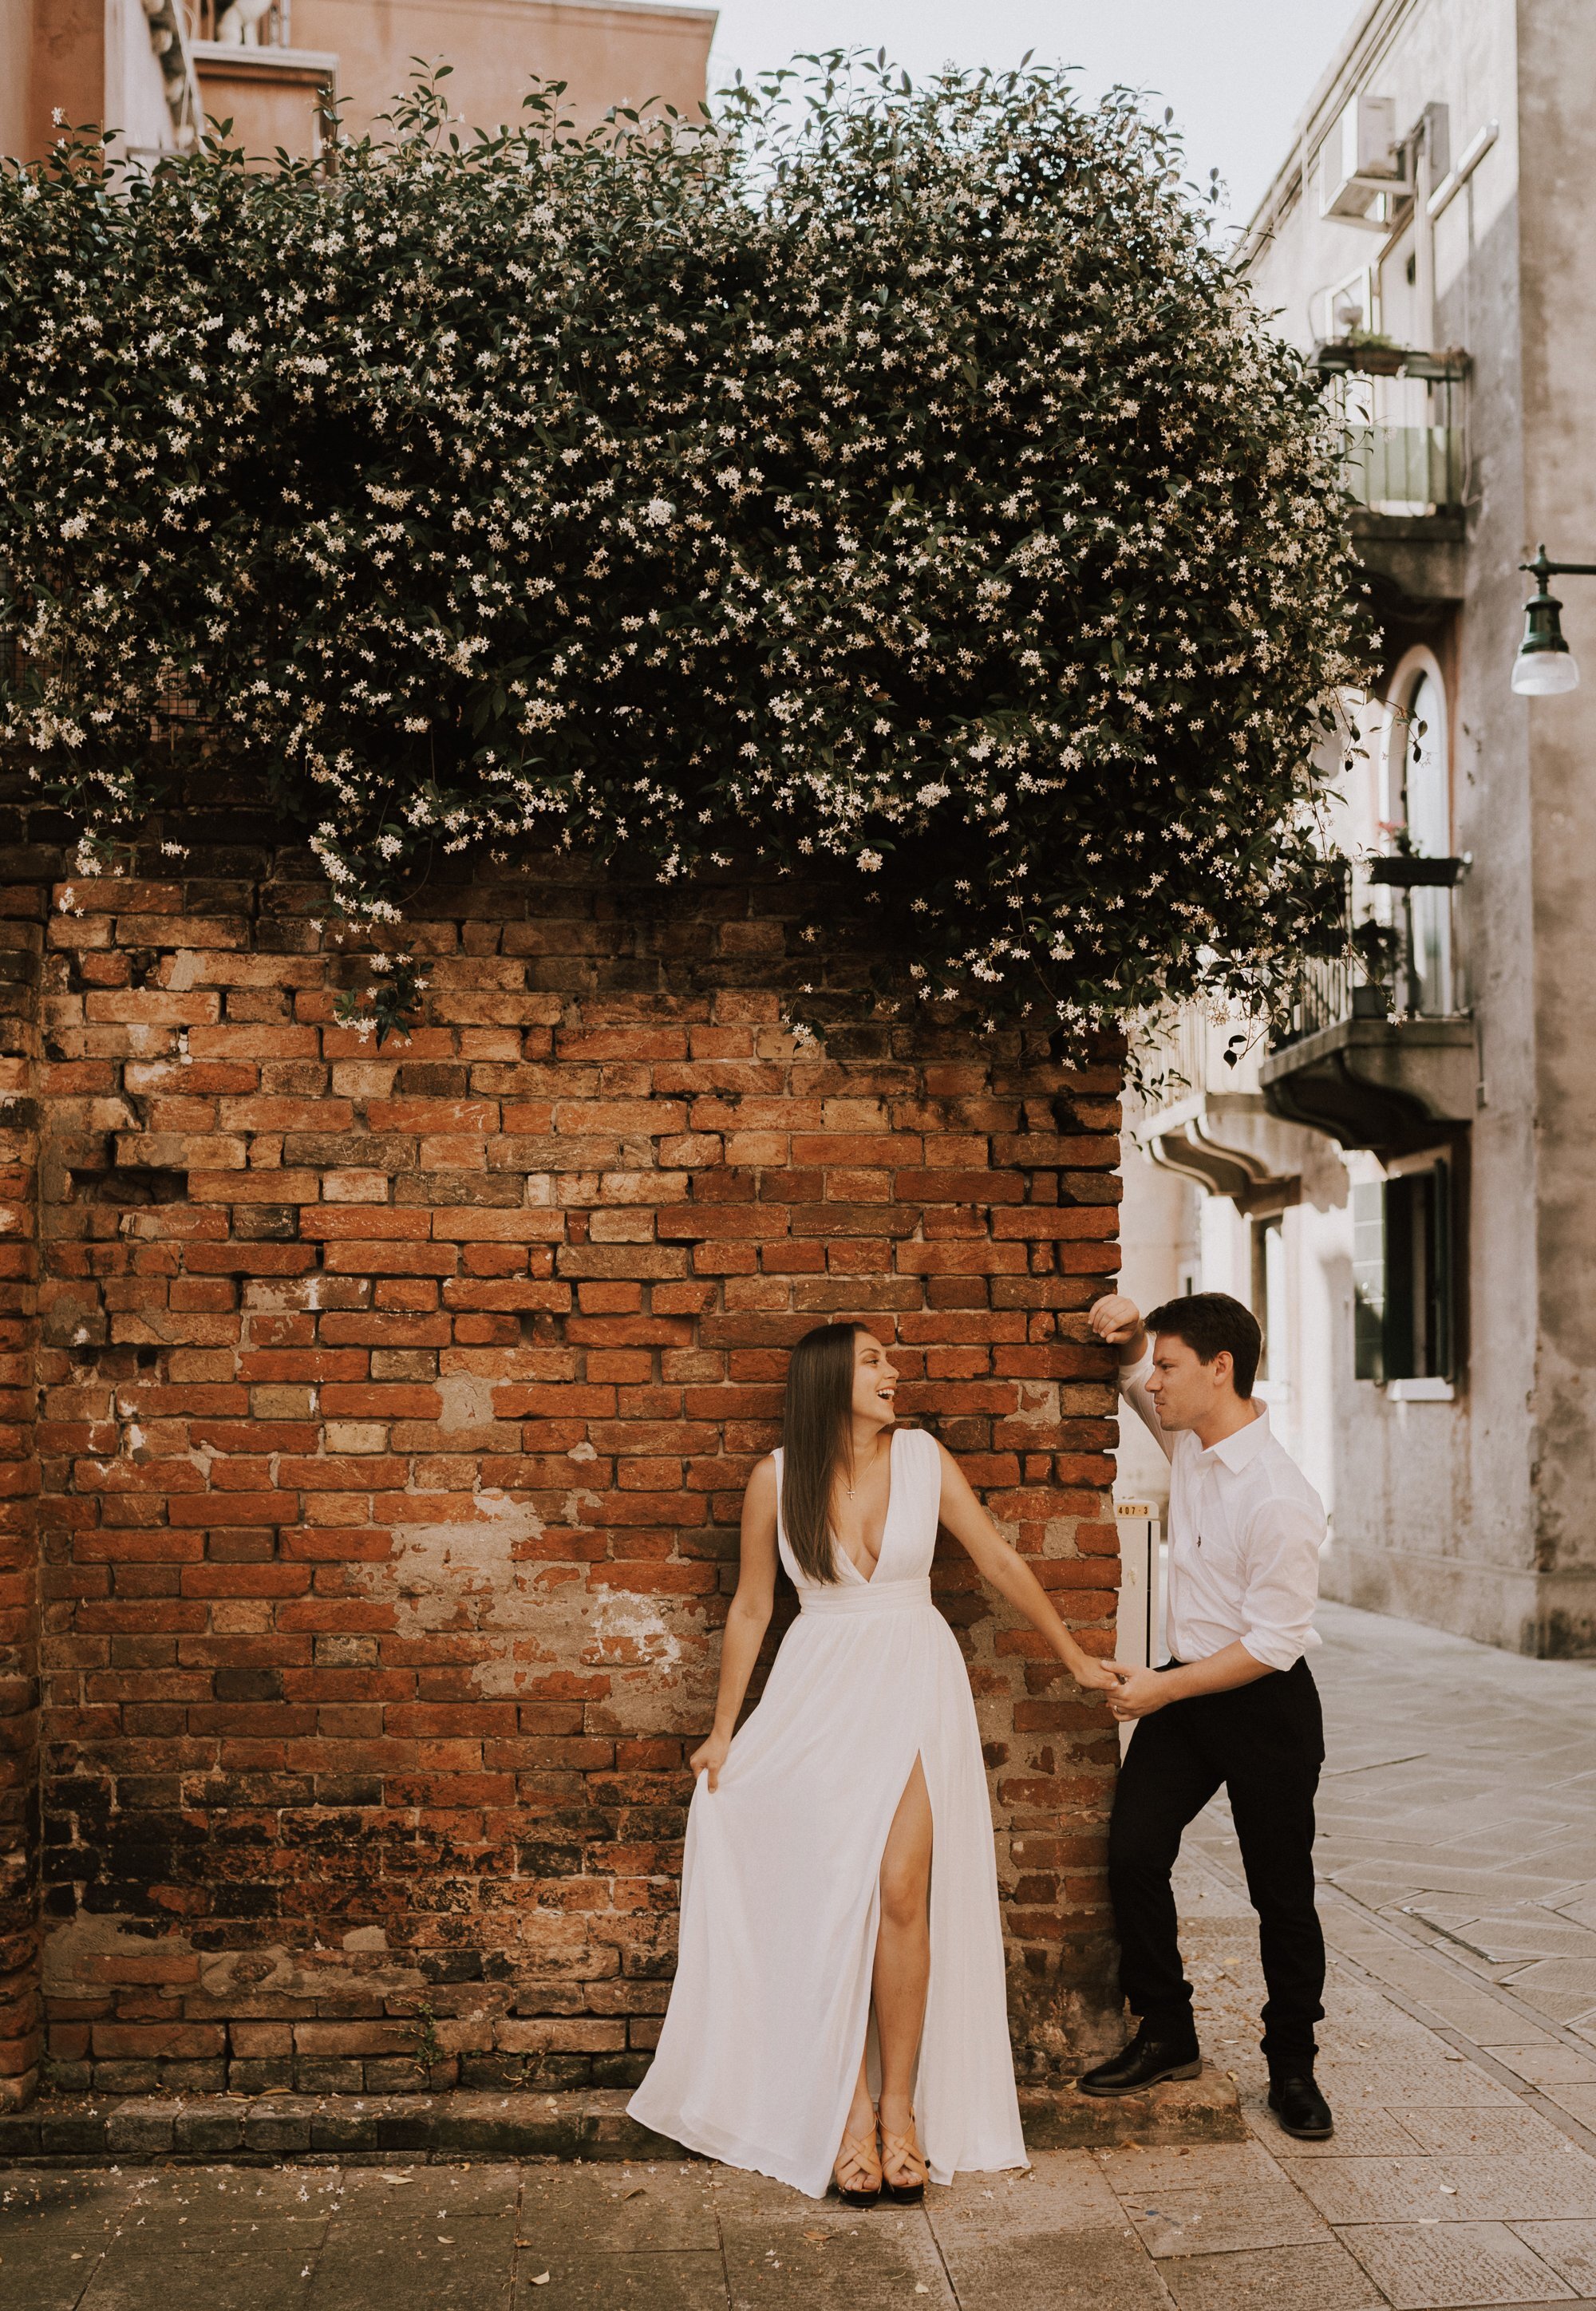 getting eloped in Venice Italy